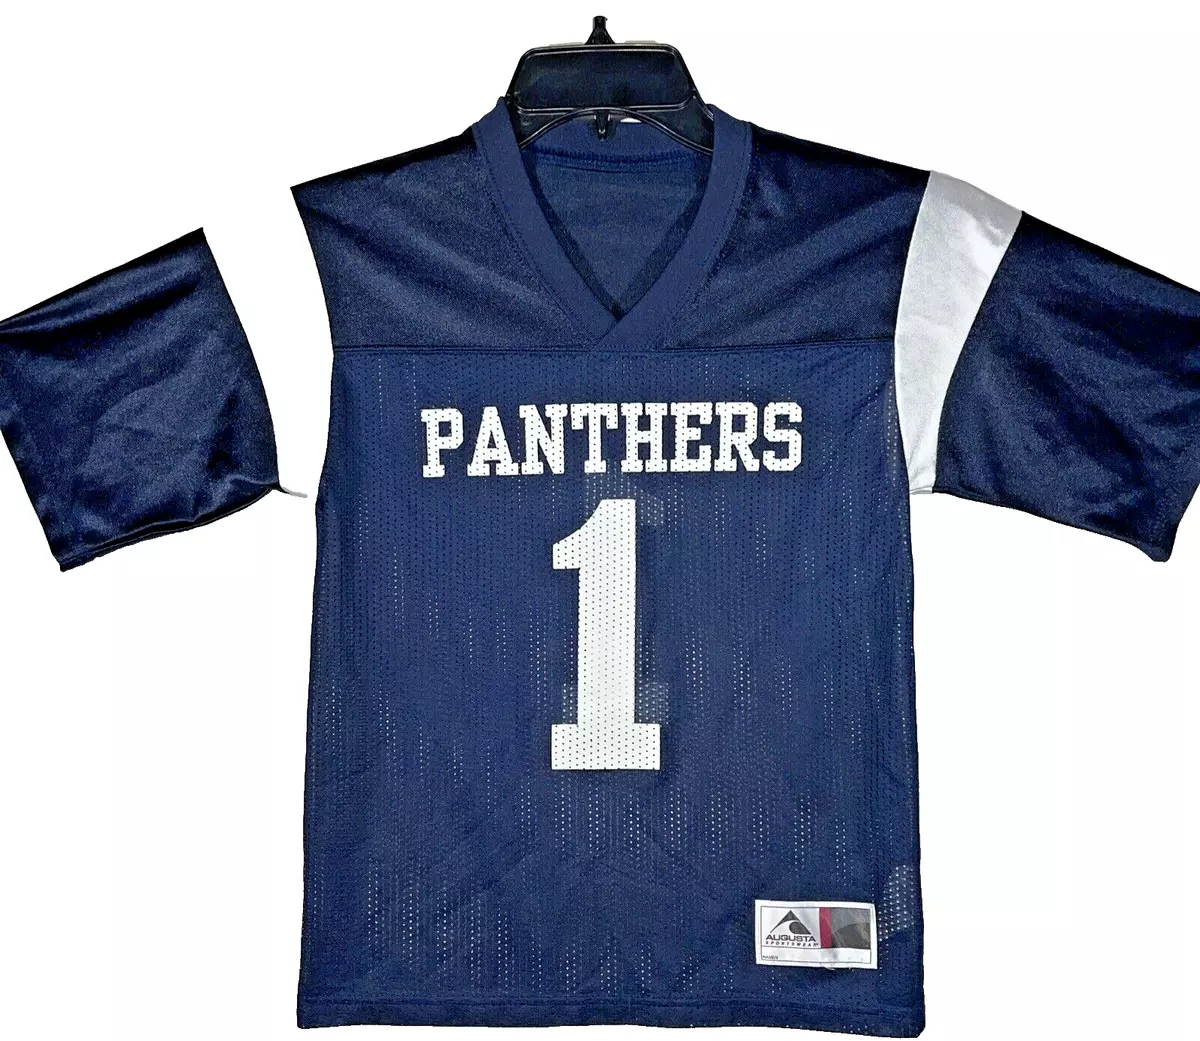 Augusta Sportswear Youth Small Navy/White #1 PANTHERS Mesh Football Jersey  NWOT